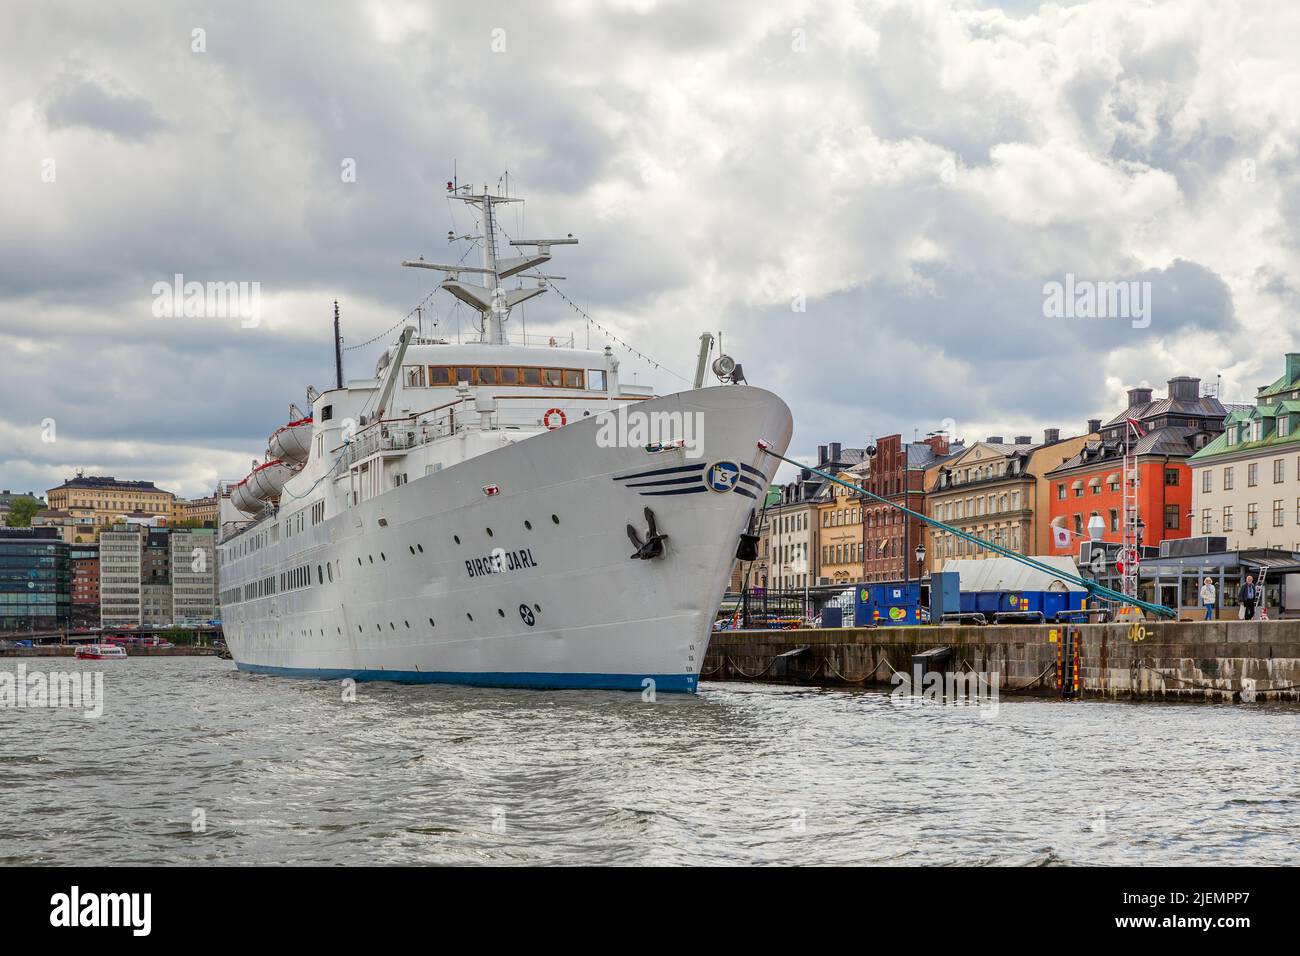 Stockholm, Sweden - May 20, 2015: Ship-hotel Birger Jarl moored in the Old Town of Stockholm (Gamla stan) Stock Photo